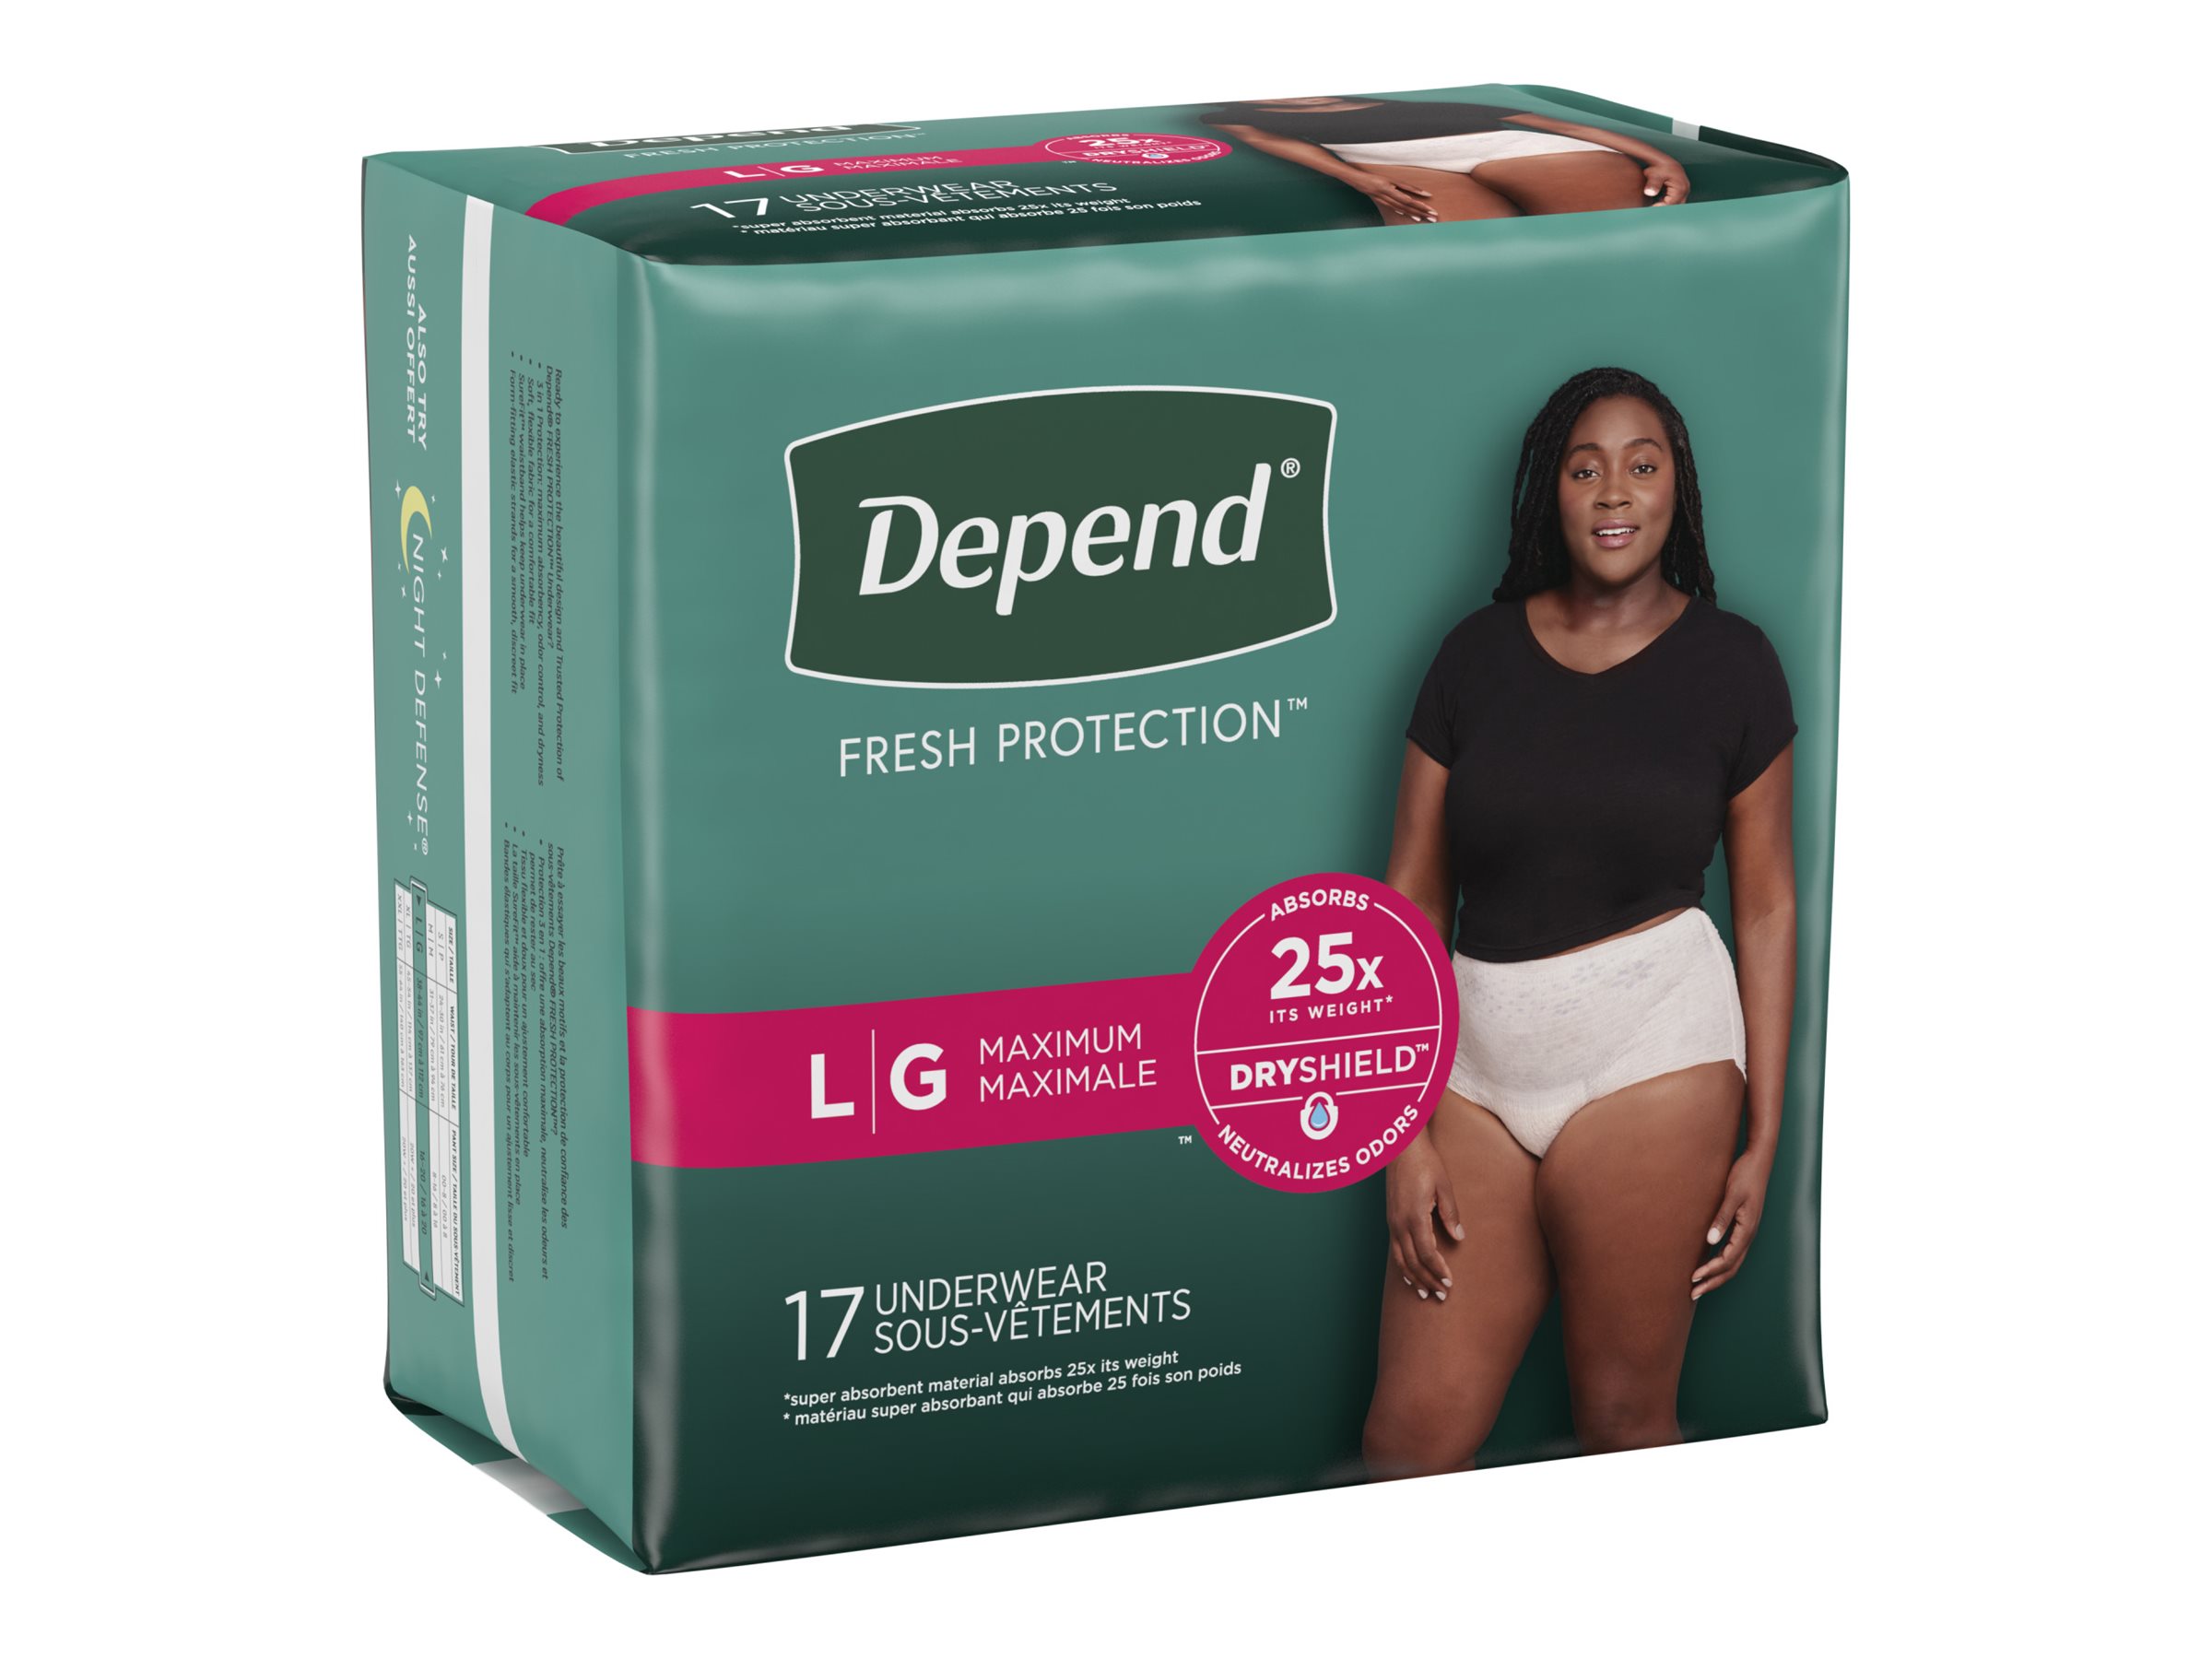 Depend Fresh Protection Incontinence Underwear for Women - Maximum